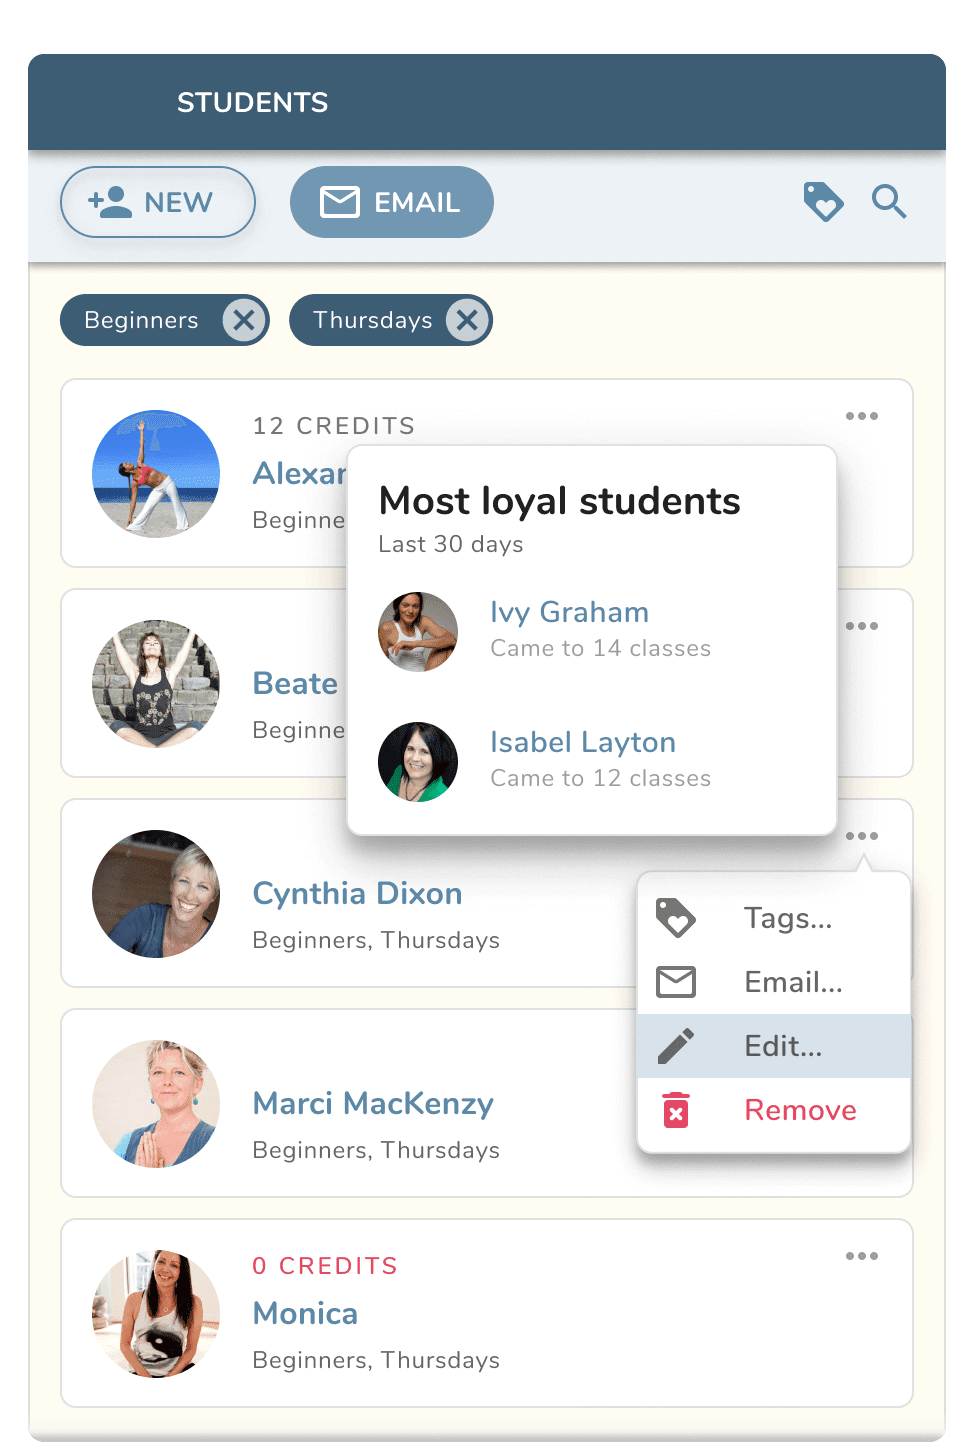 Organise & manage clients: Tags let you create groups of clients. Group emailing without complication lets you send out targeted emails in seconds. Student notes & history, Stats & insights put you fully in control of your client list.